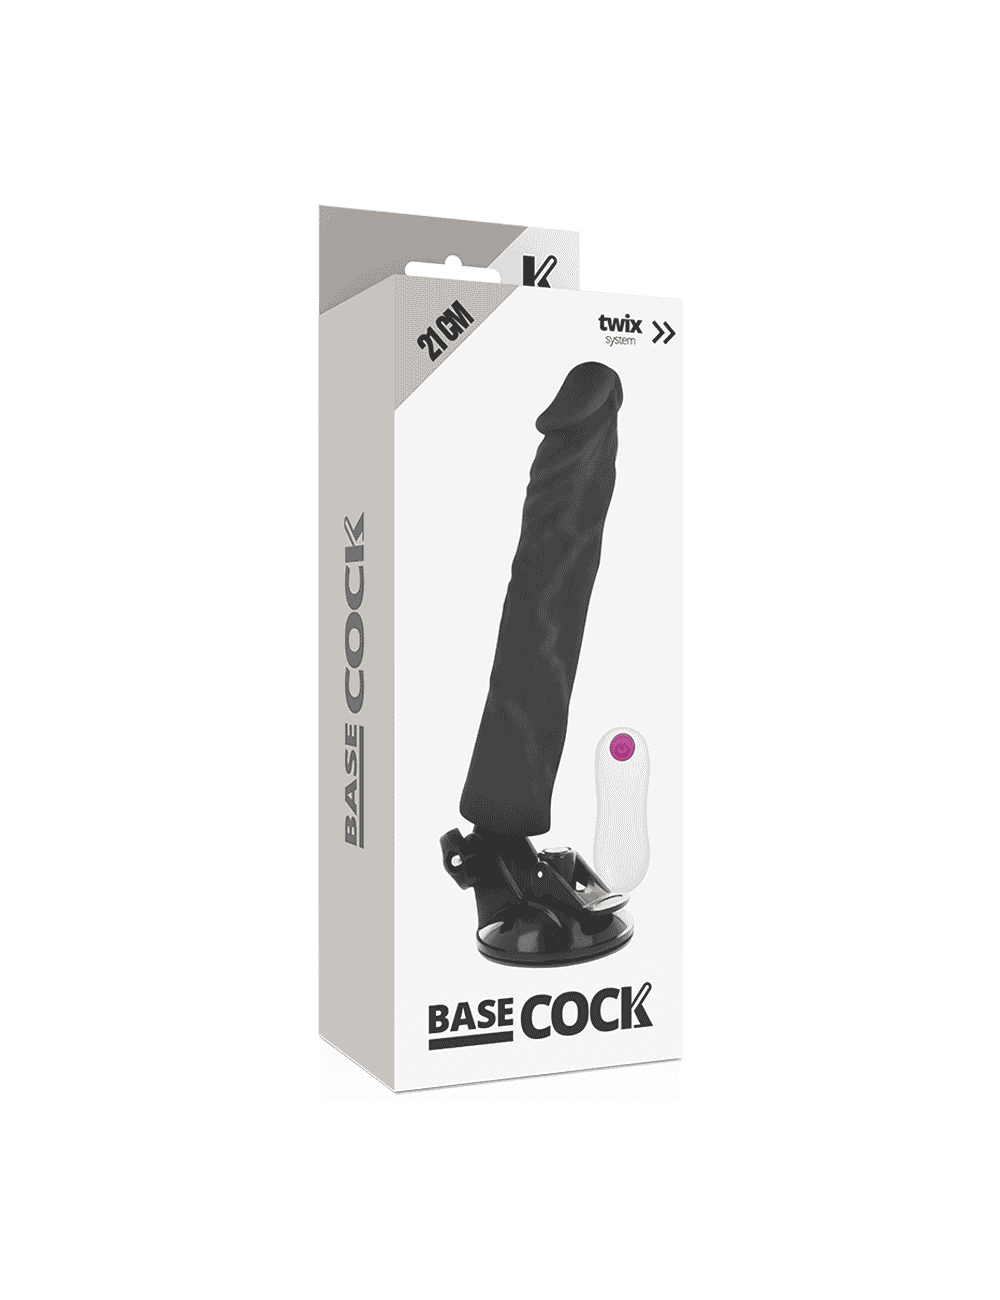 Base Cock Vibrator With Handsfree Support